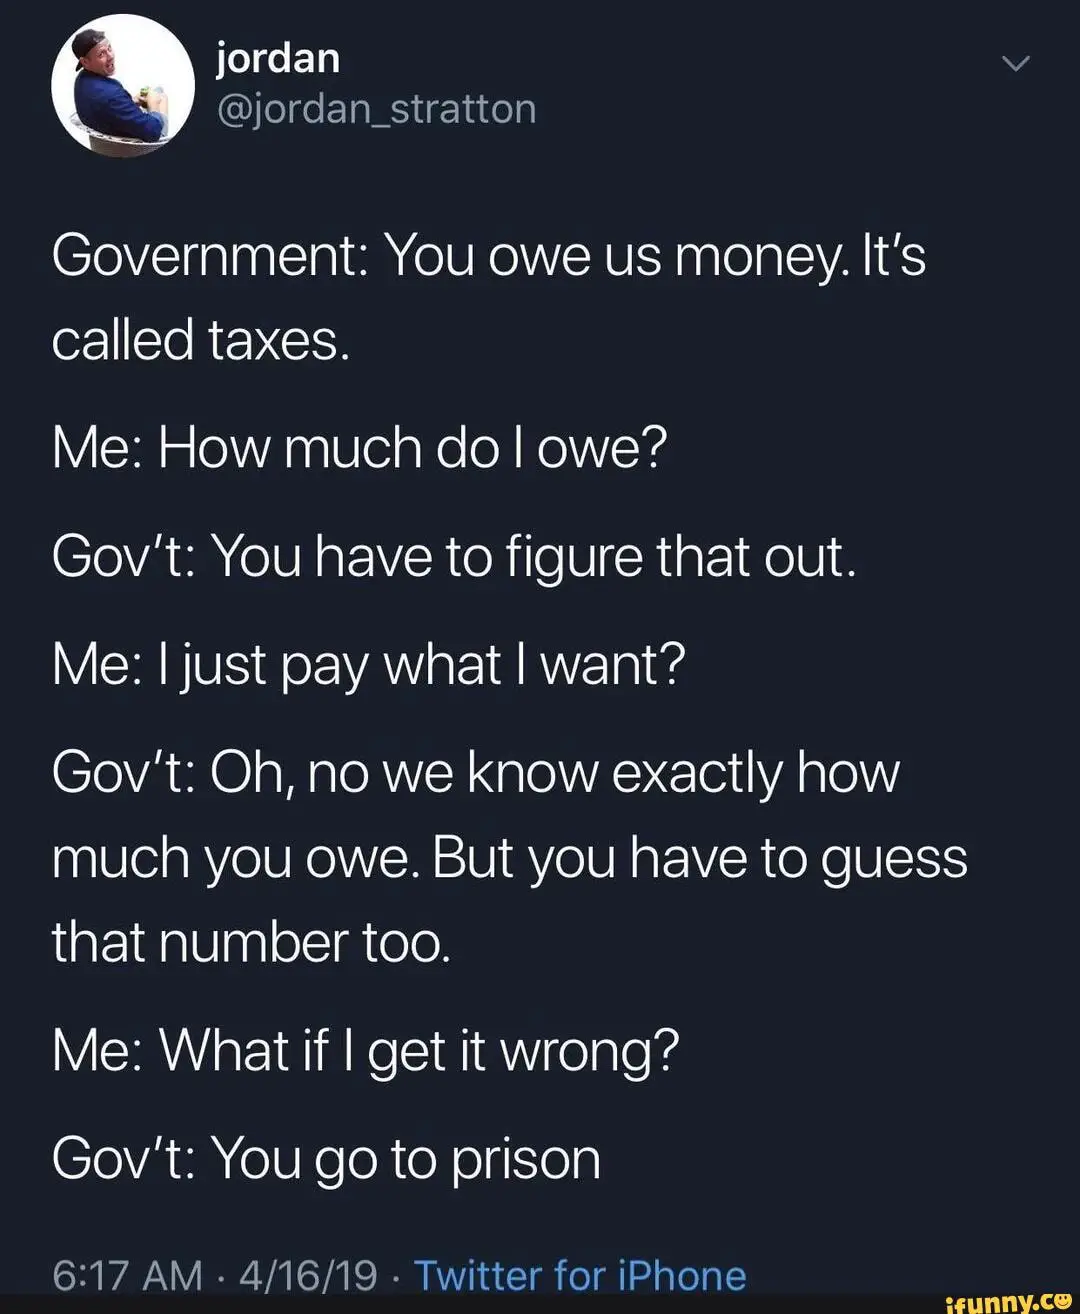 Government: You owe us money. It